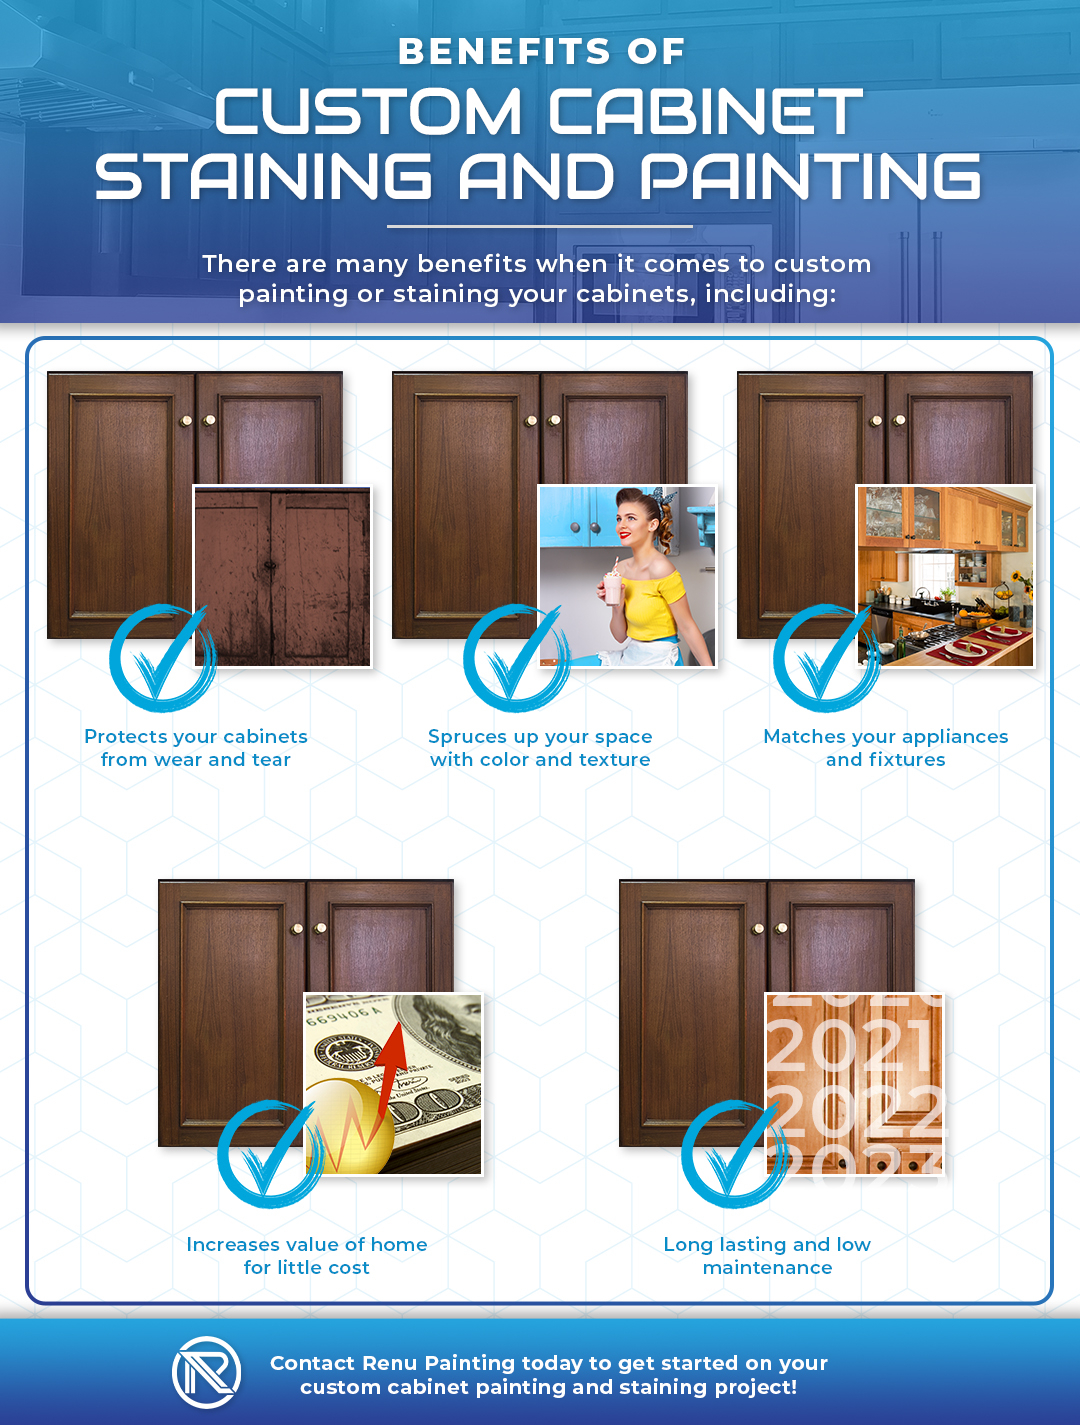 Benefits-Of-Custom-Cabinet-Staining-and-Painting-5f0c9833102a3.jpg